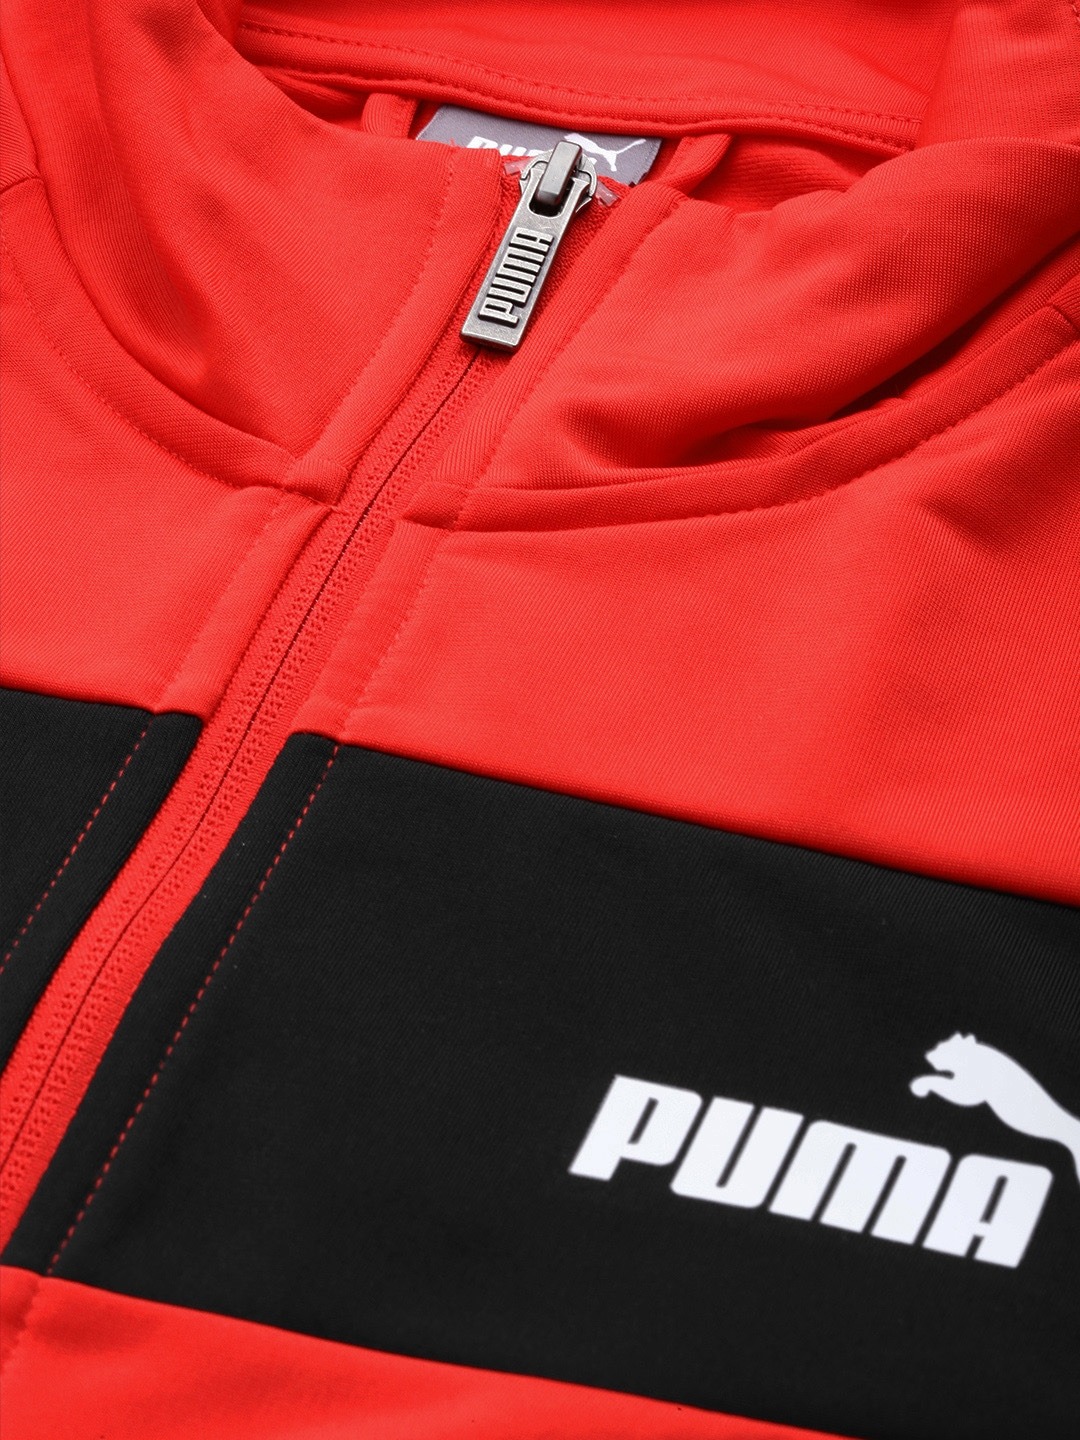 Clothing Tracksuits | Puma Men Red & Black Solid Track Suit - VN16562